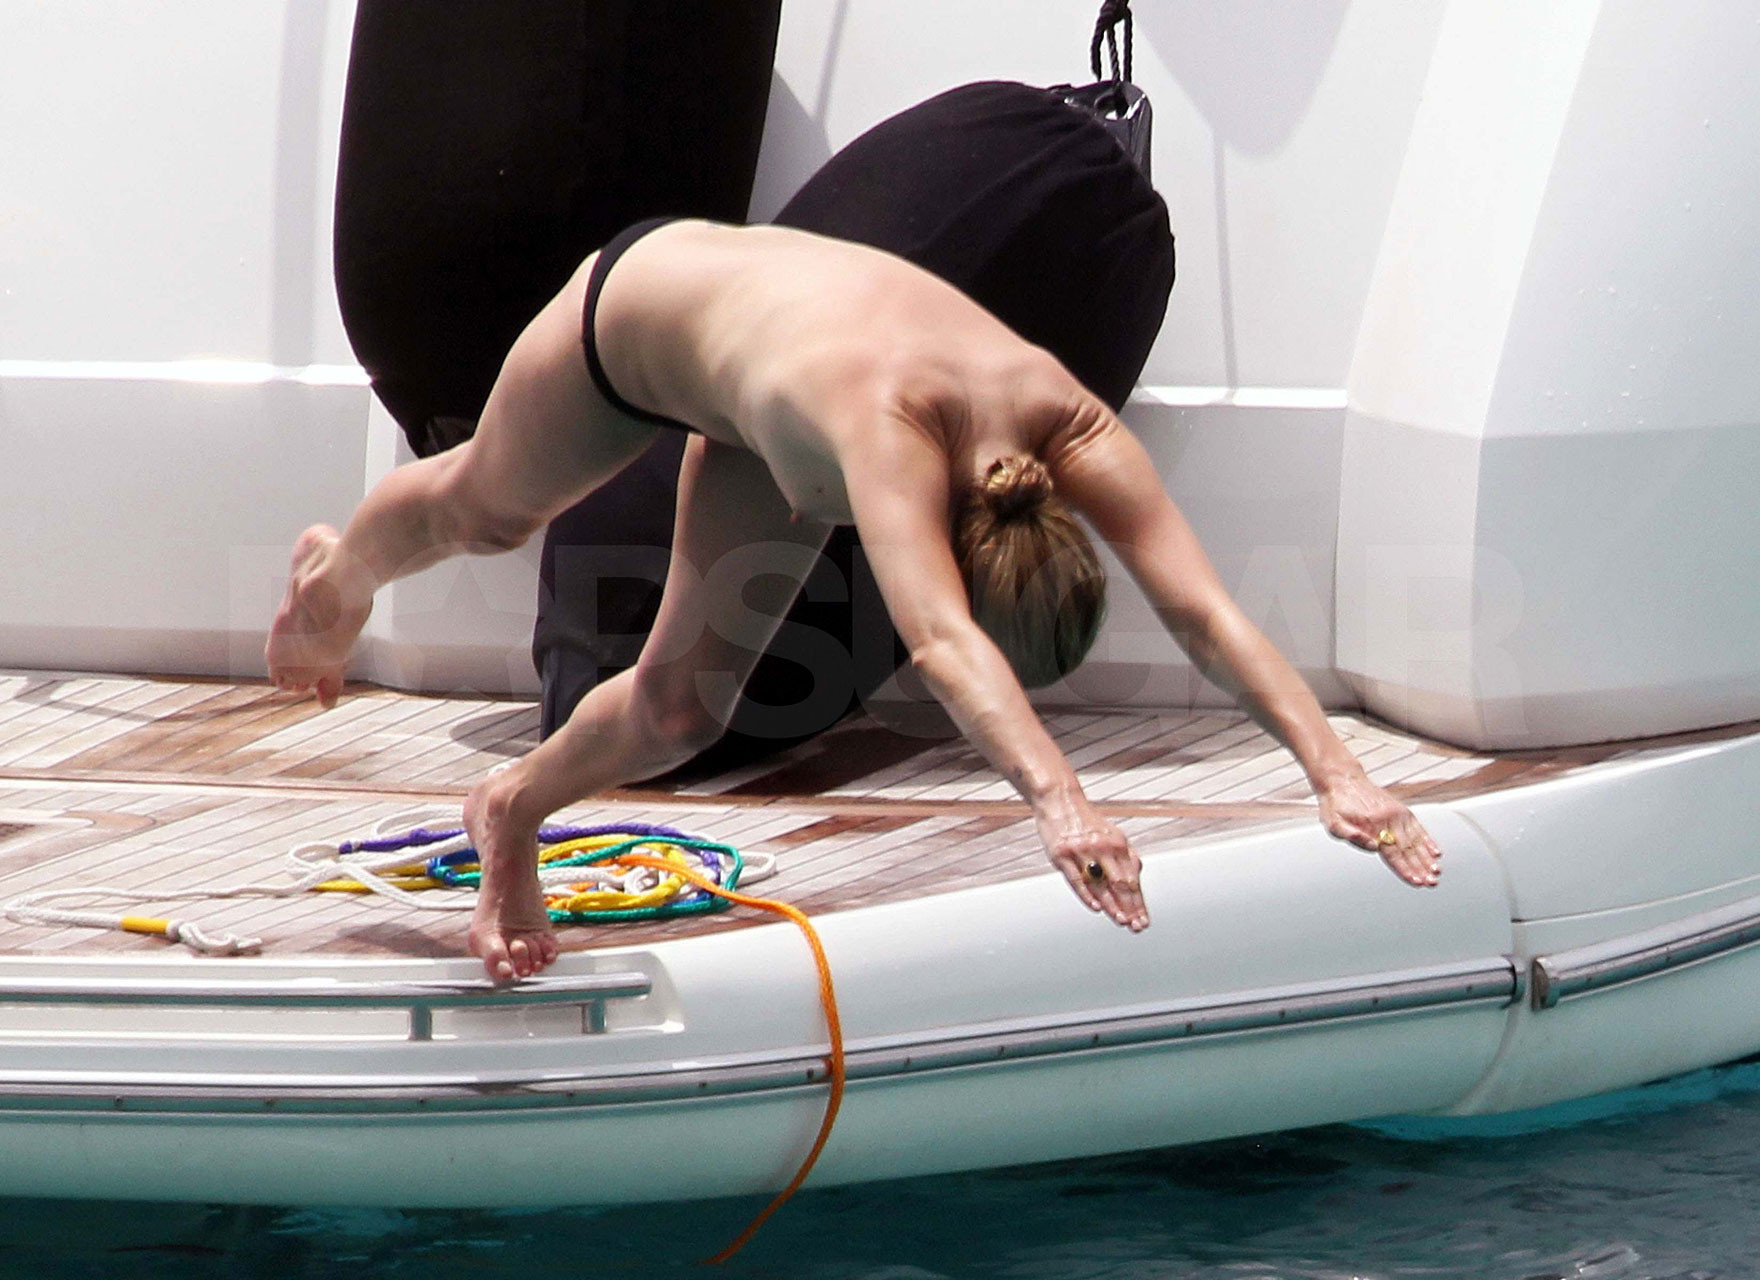 Kate Moss enjoying with her boyfriend on yacht in topless paparazzi photos #75347836